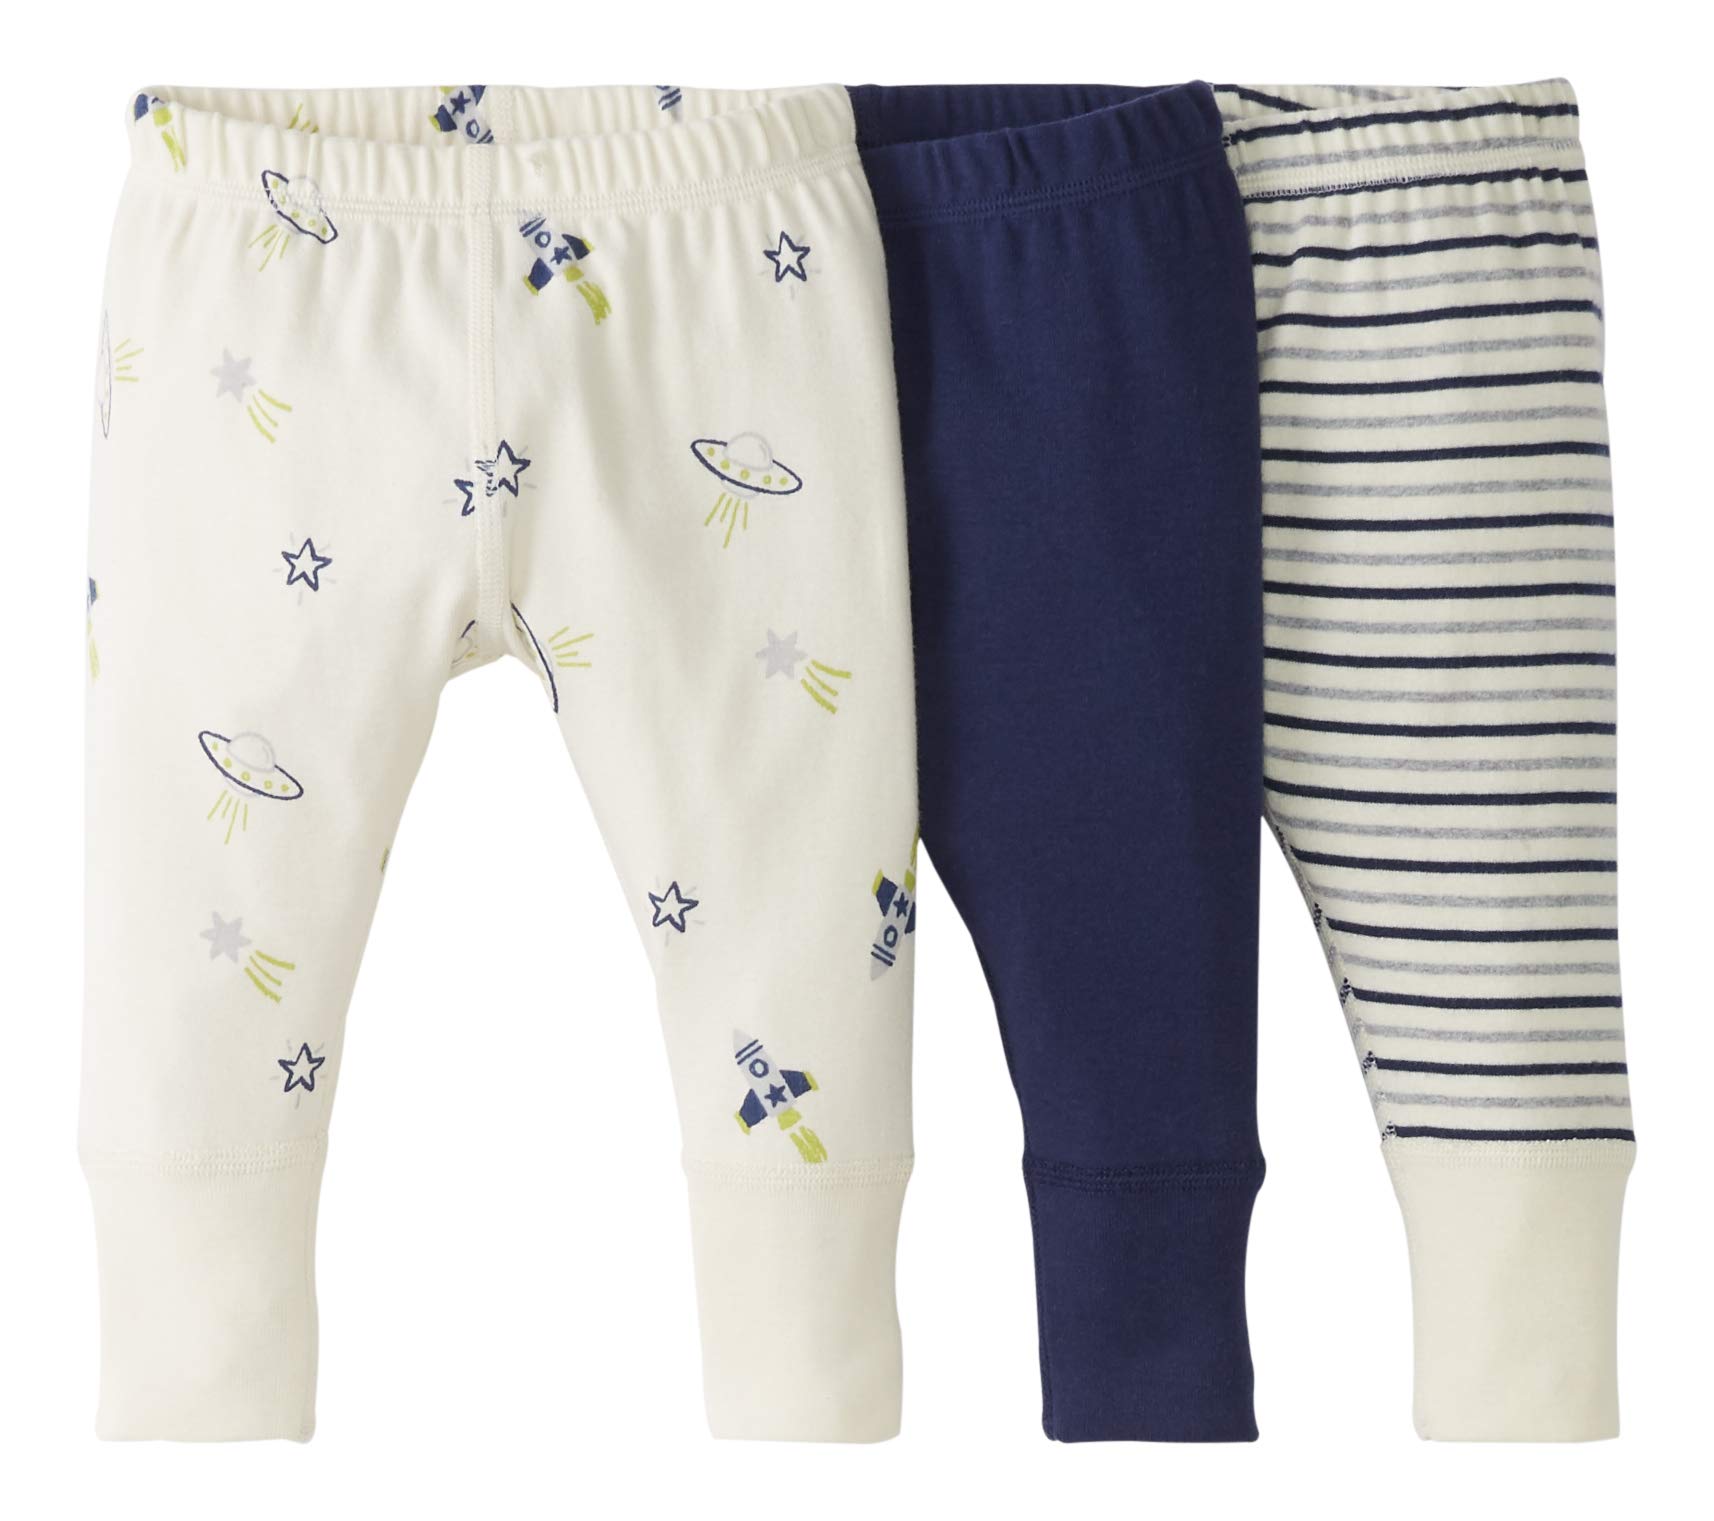 Moon and Back by Hanna Andersson Unisex Baby Jogginghosen aus Bio-Baumwolle, 3er-Pack, Blue Multi, 6-12 Monate